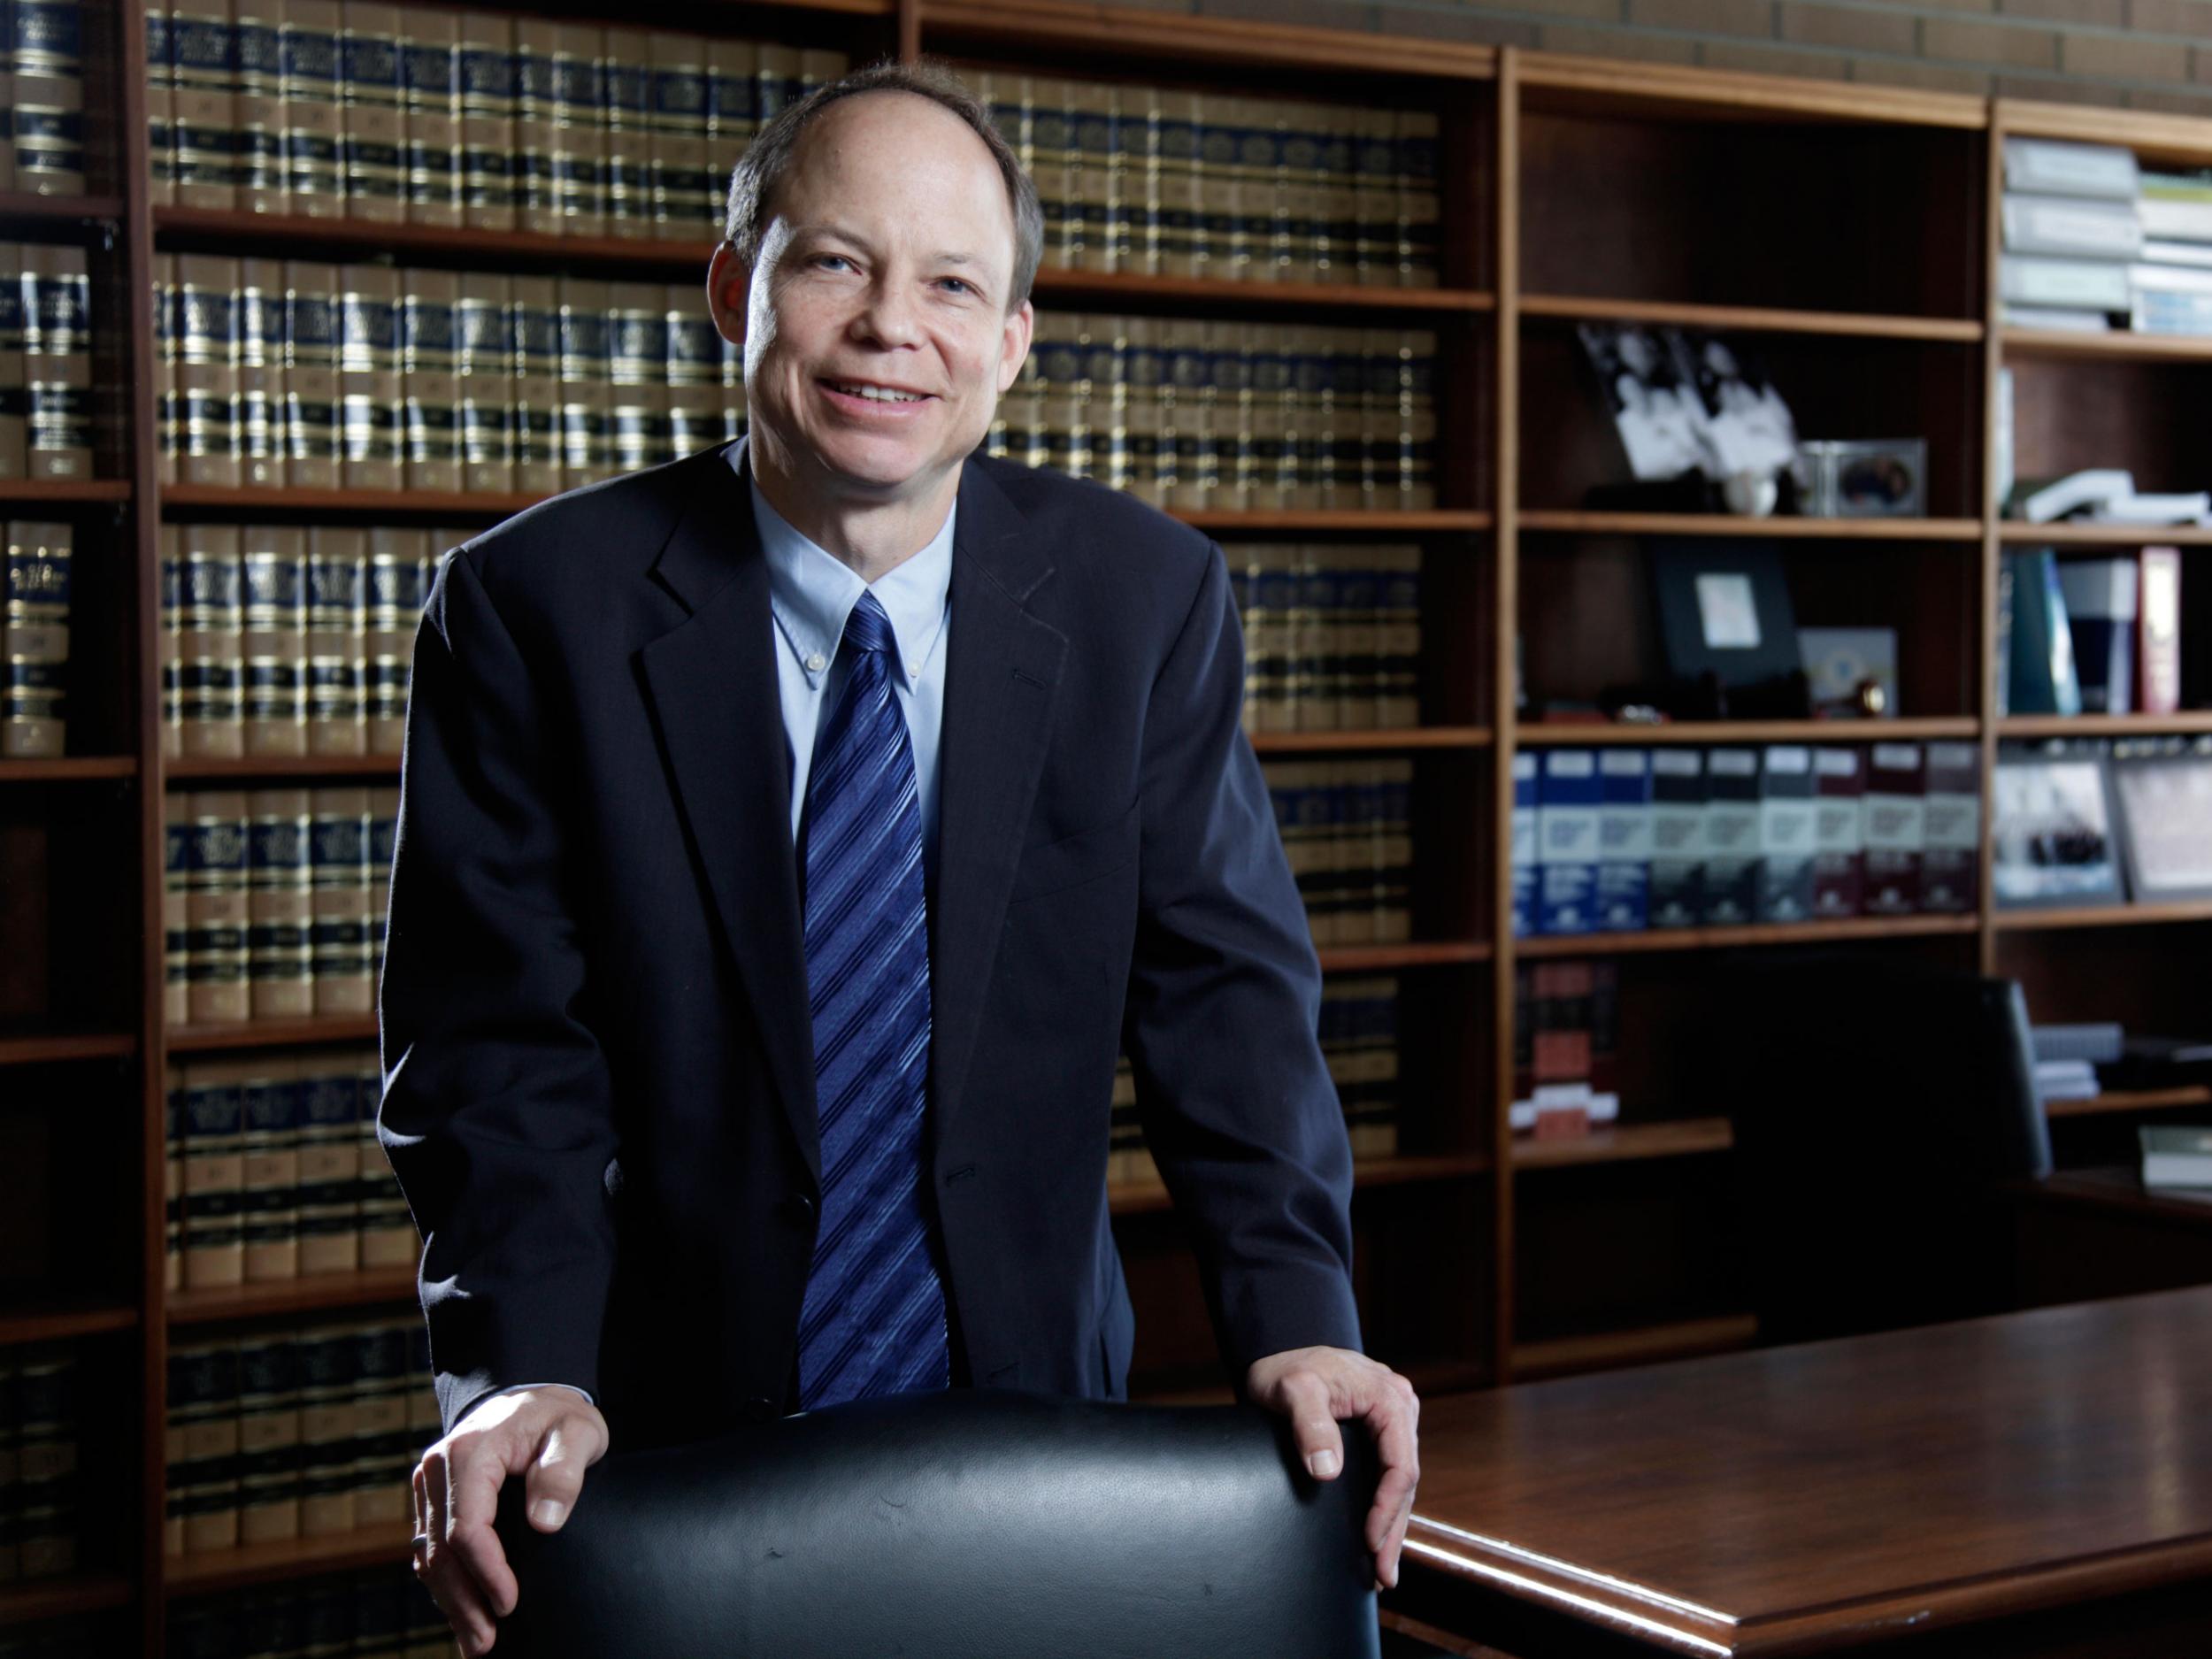 A petition is calling for Judge Persky to be removed